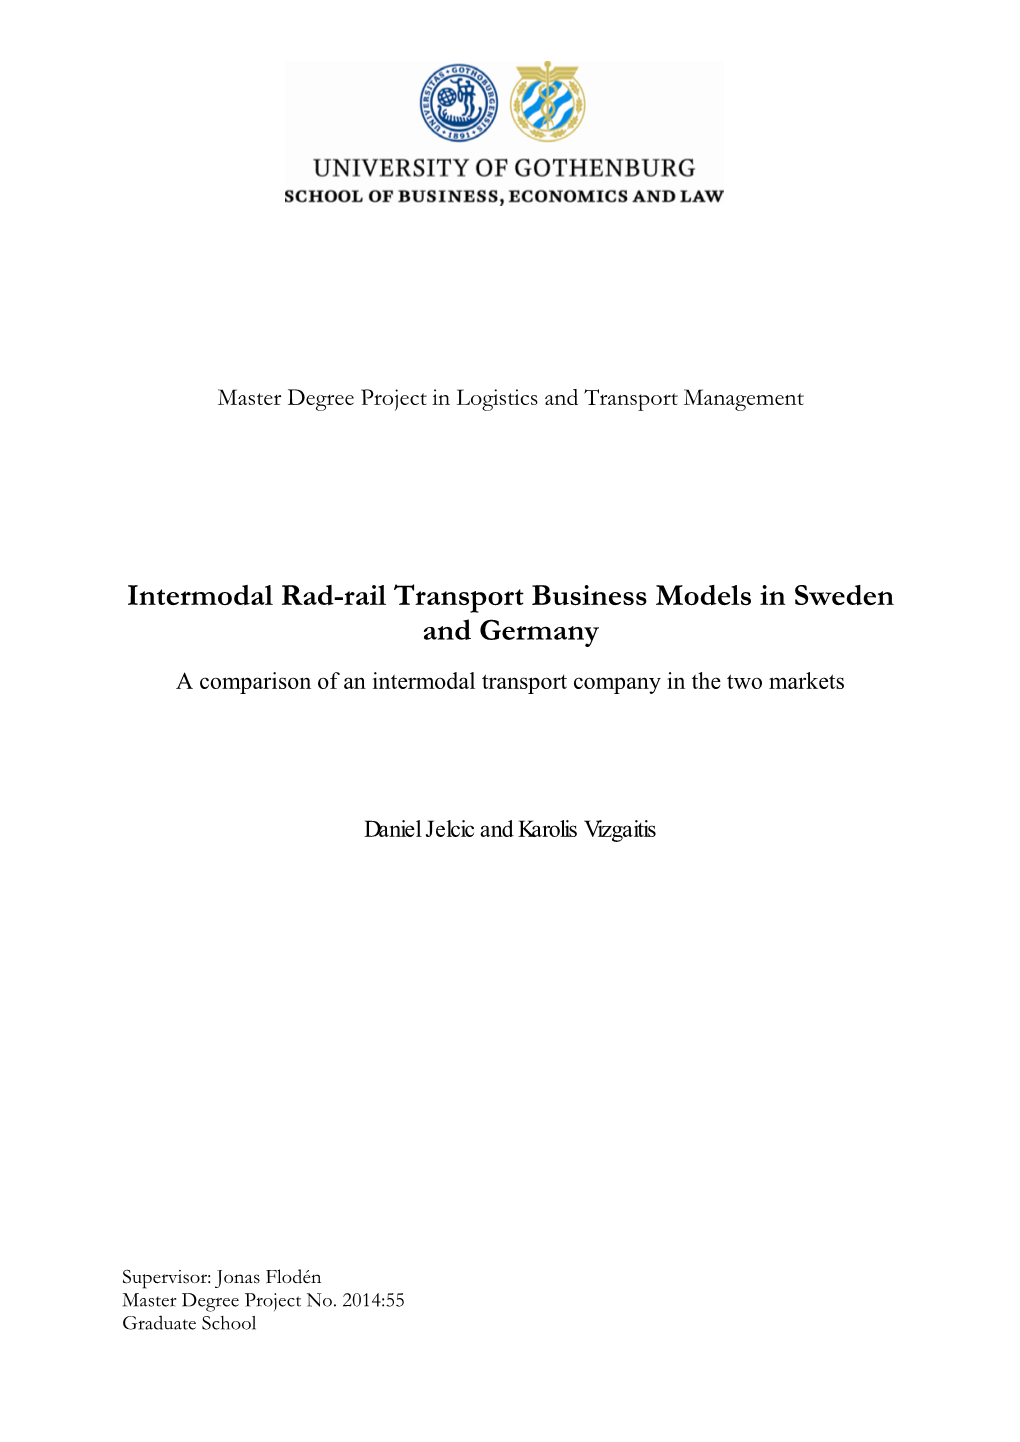 Intermodal Rad-Rail Transport Business Models in Sweden and Germany